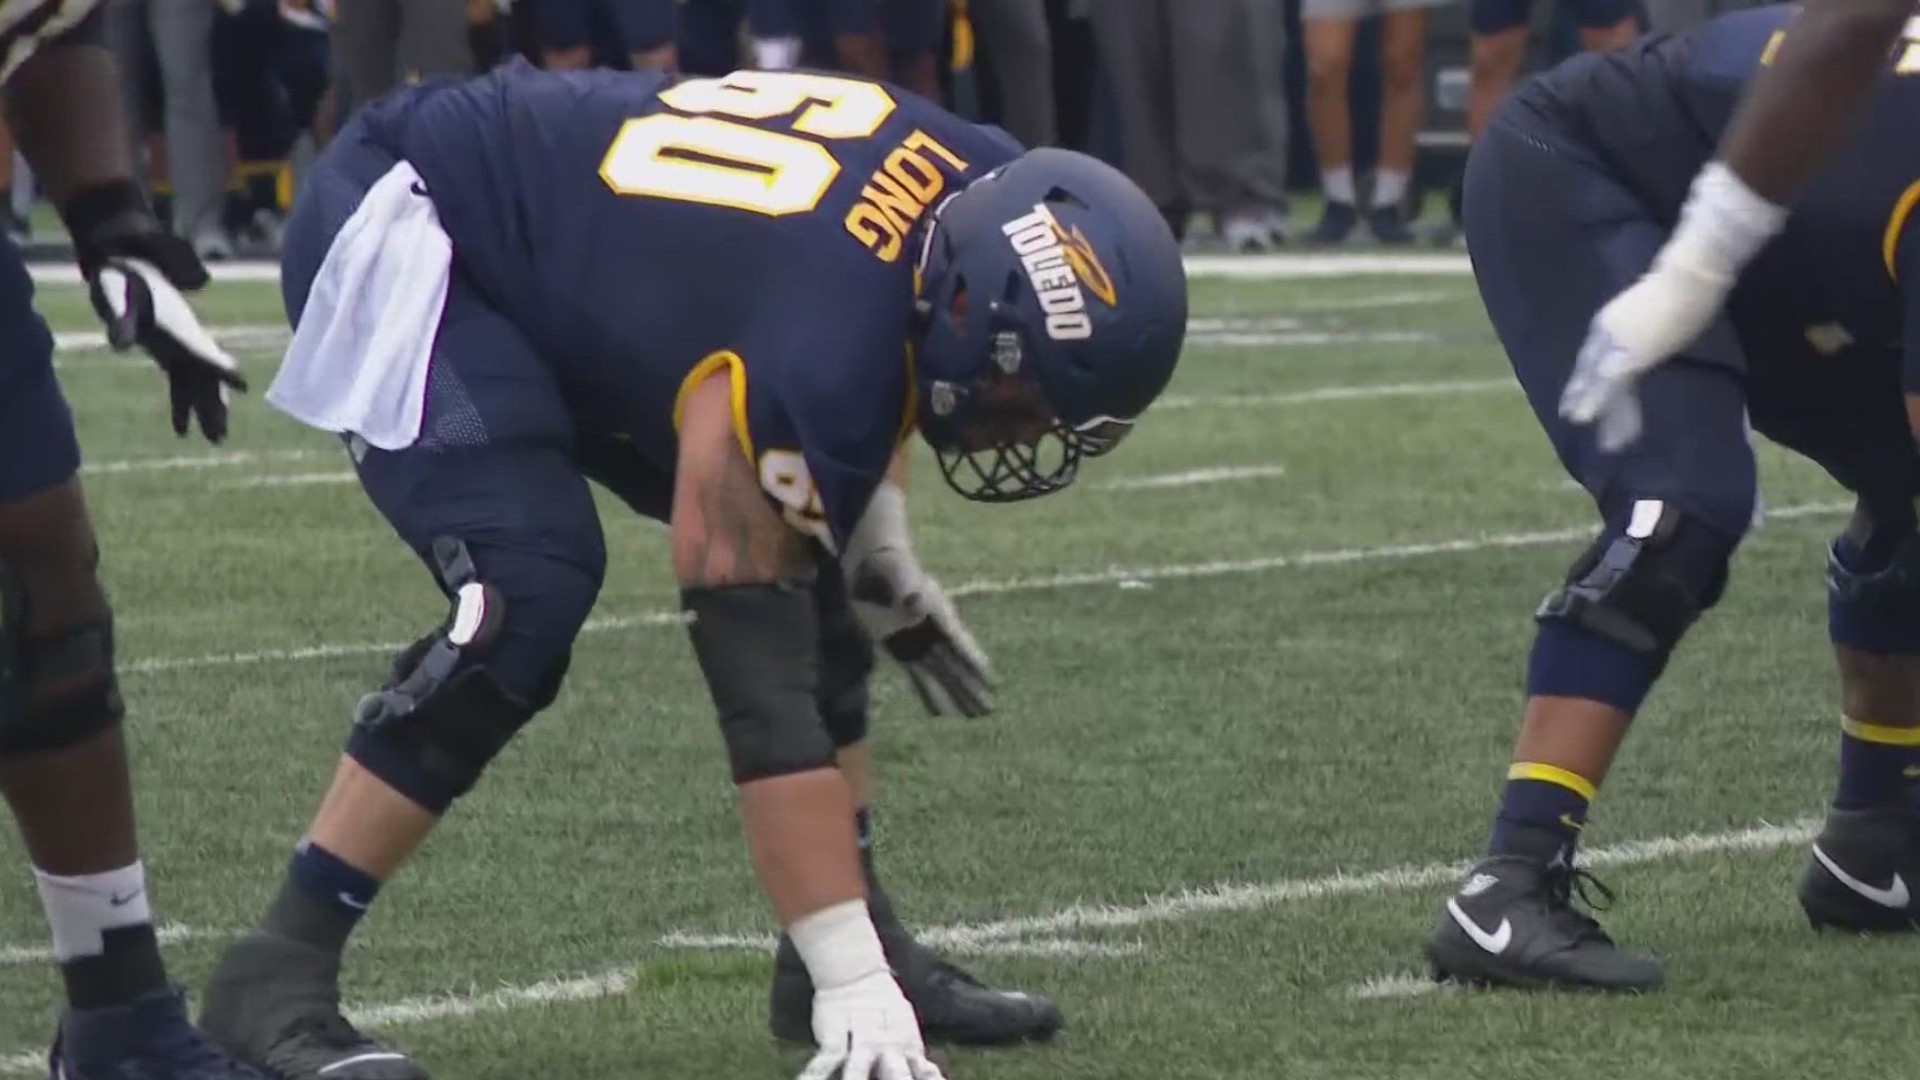 The junior offensive lineman missed all of the 2022 season with a broken ankle. He has started both of Toledo's games this year at right guard.